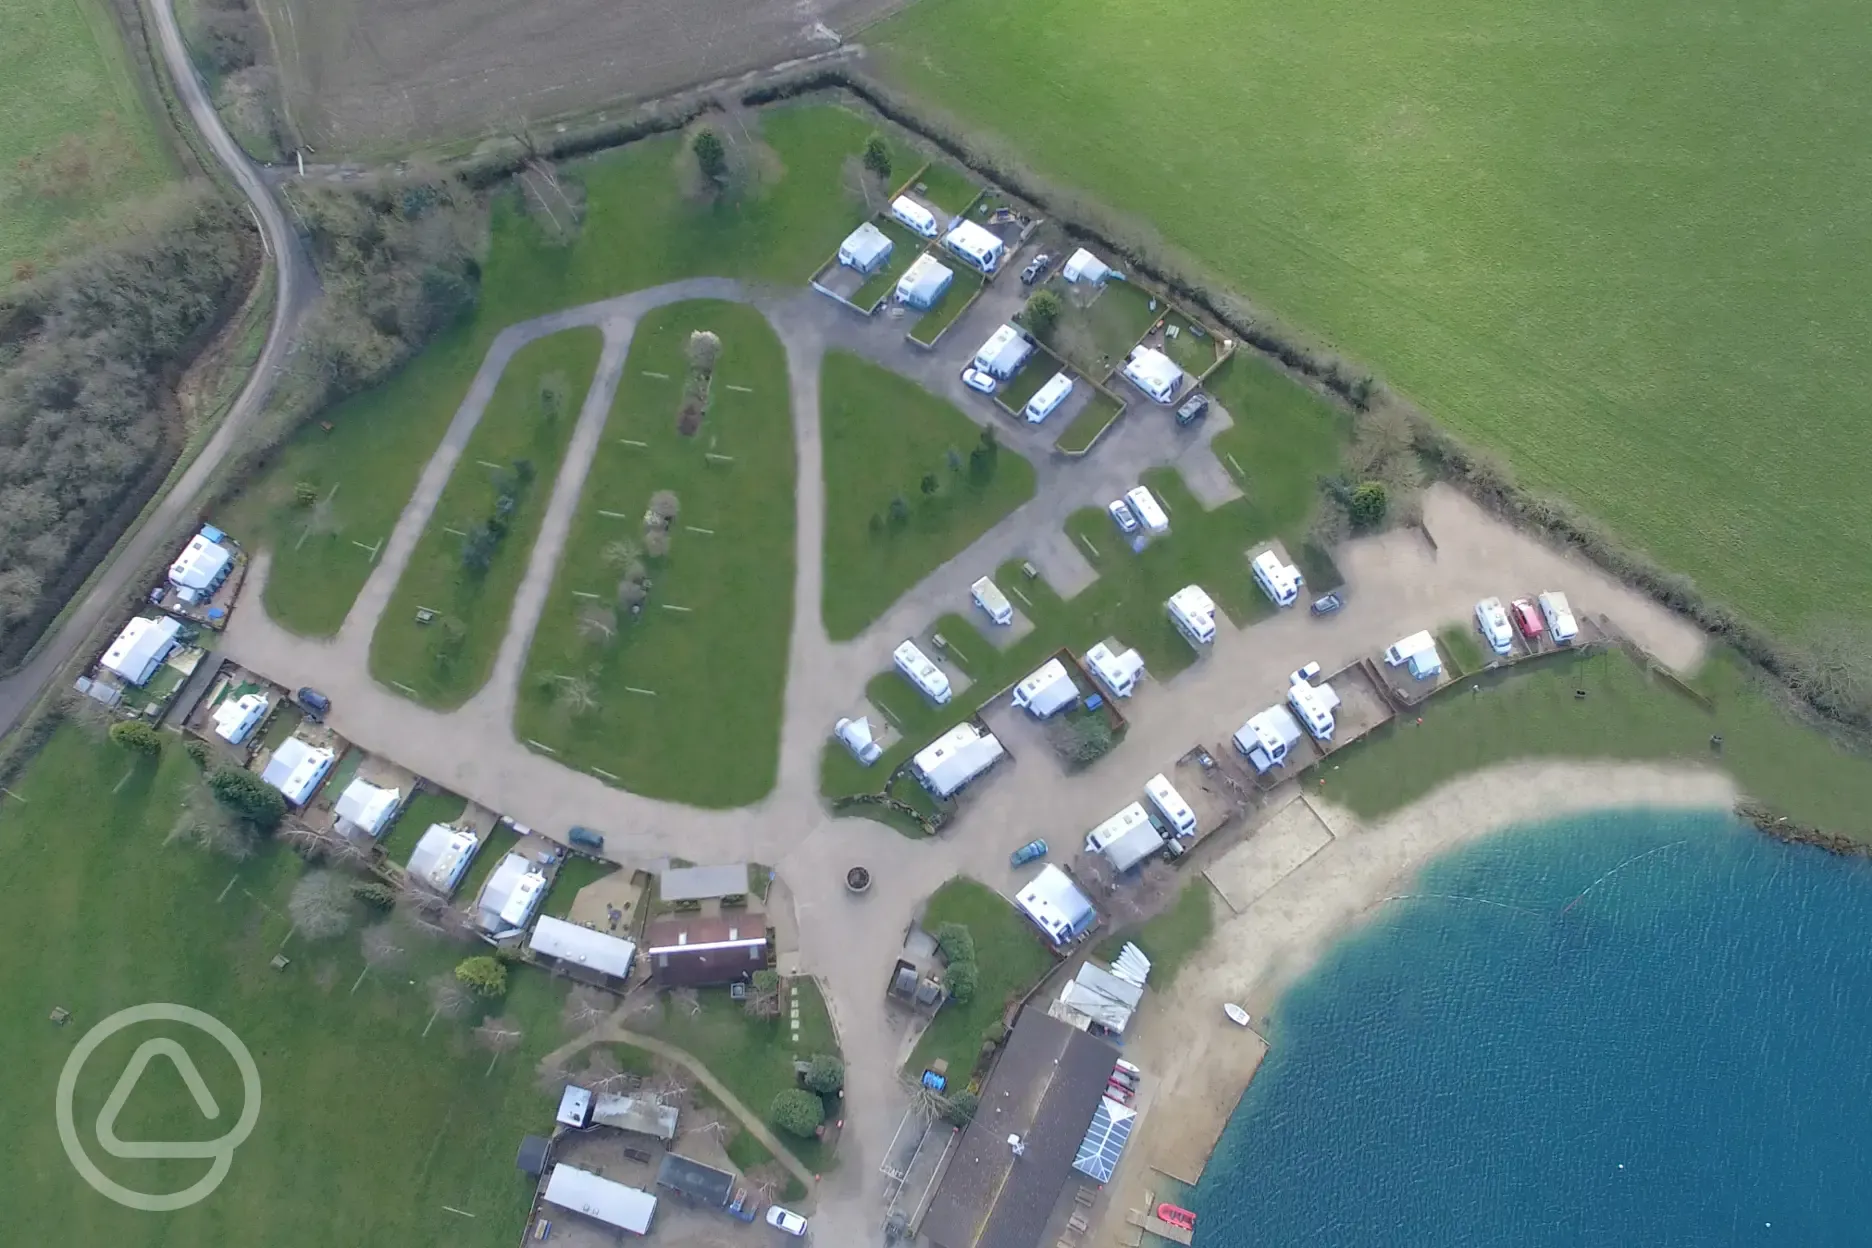 The main campsite at Bosworth Water Park